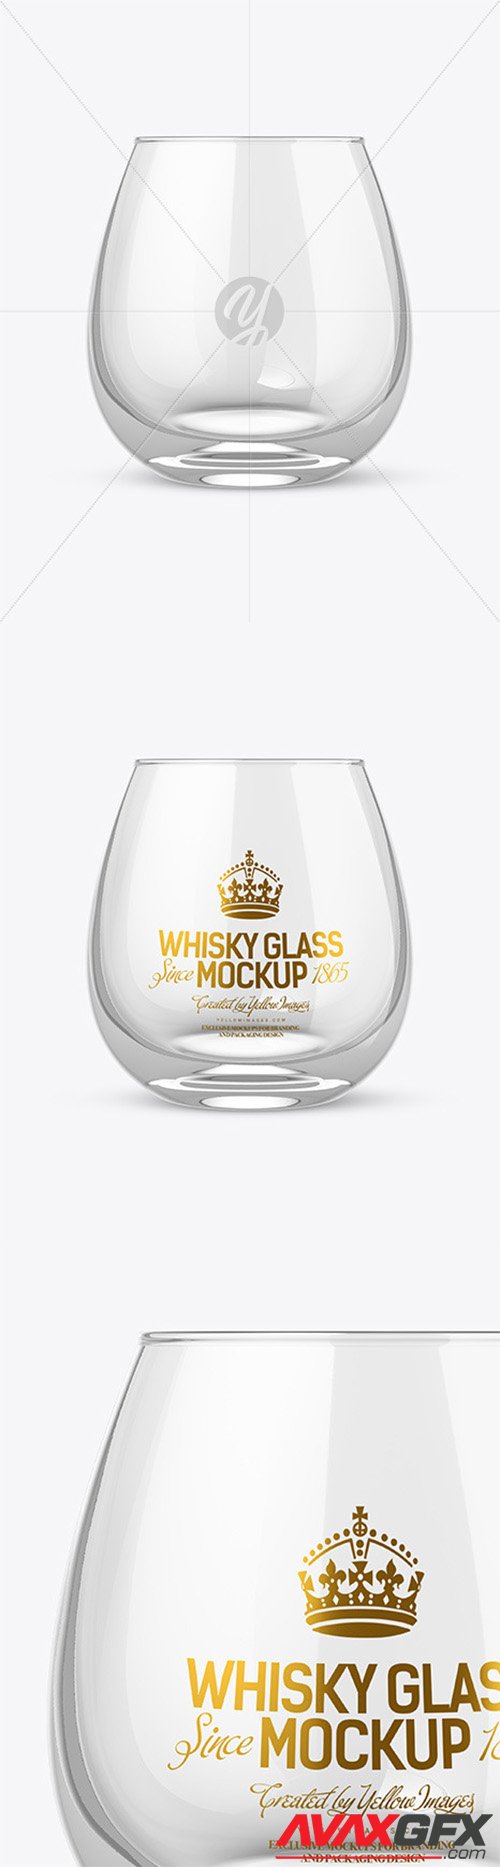 Clear Whisky Glass Mockup 57165